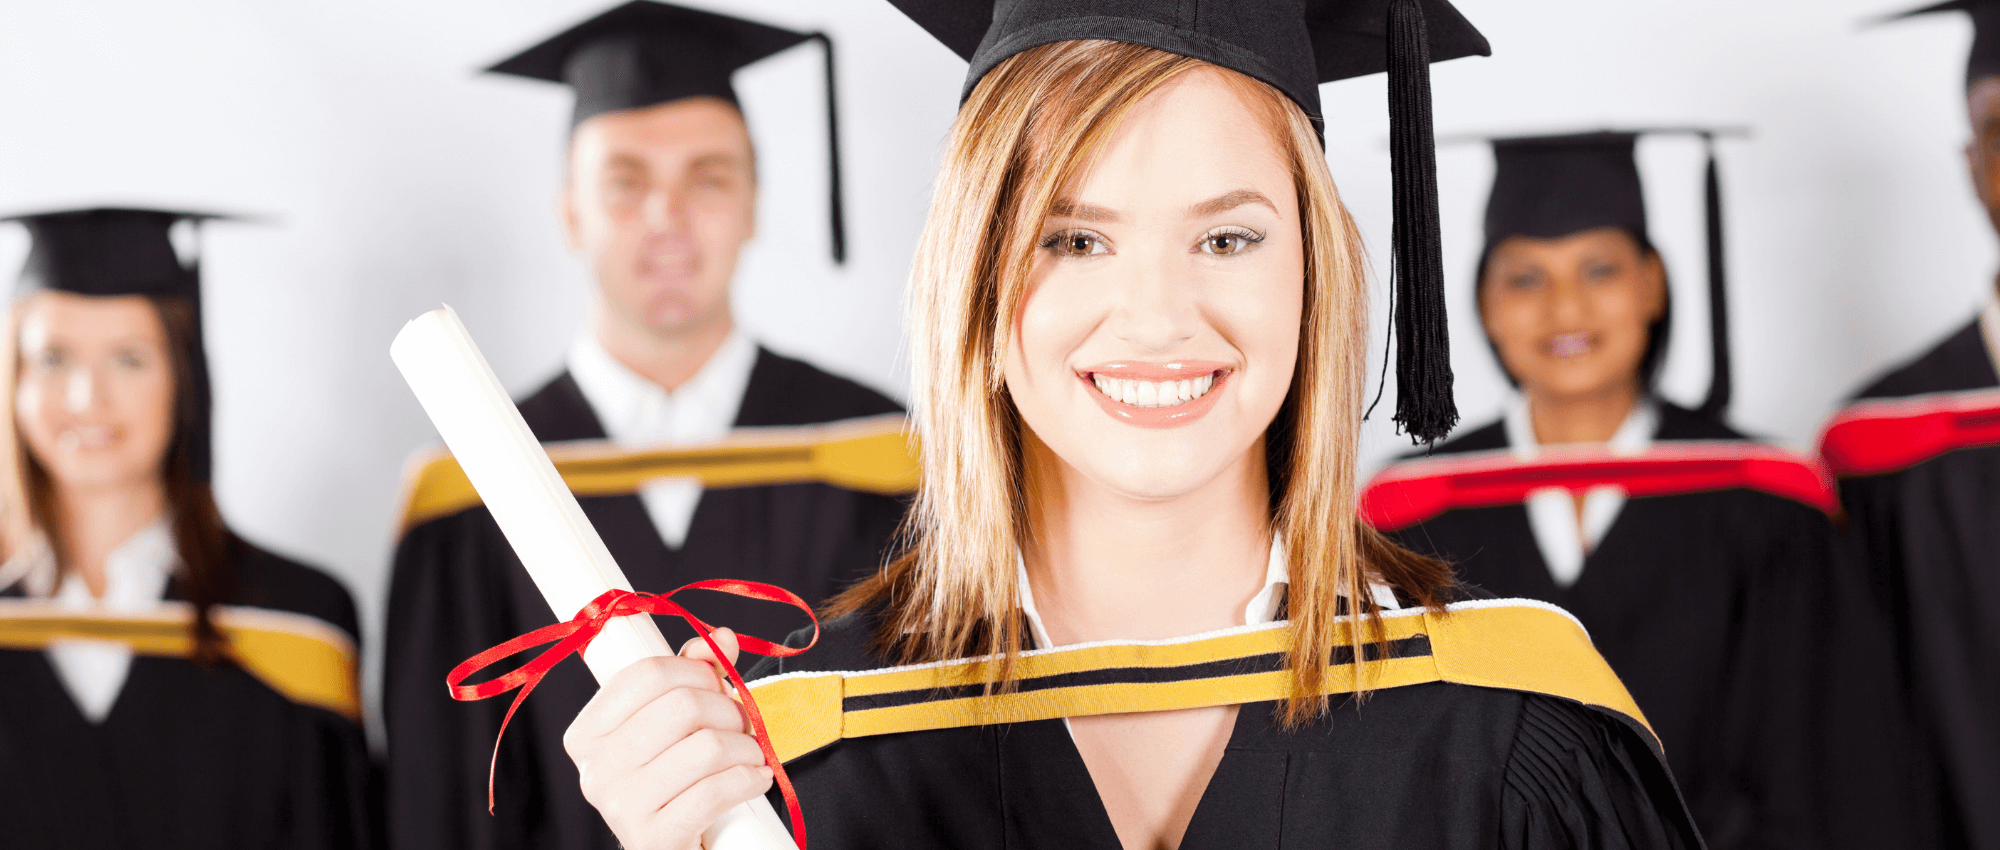 Getting loans and grants for education and training